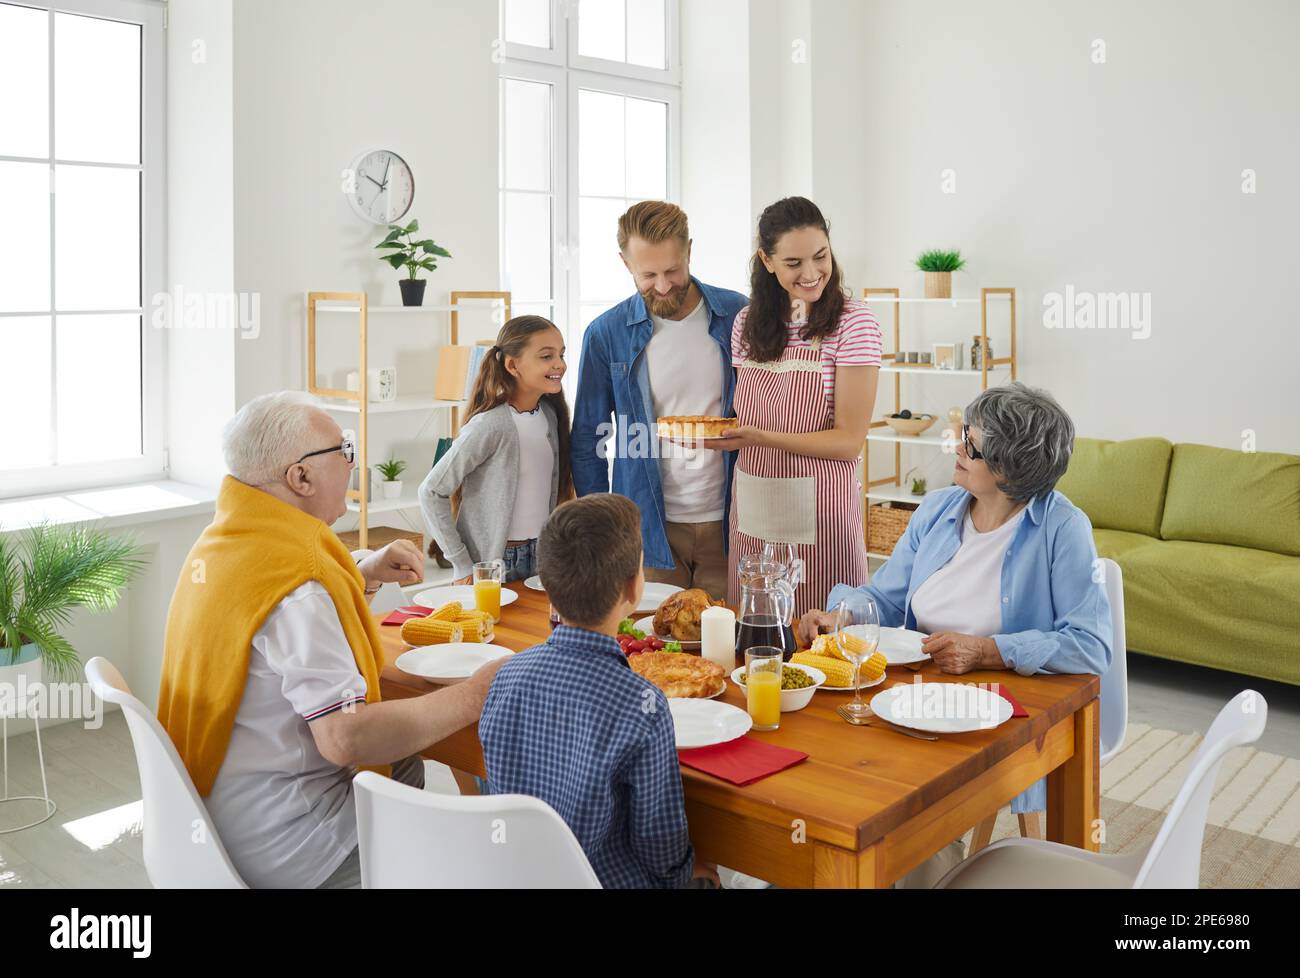 Dinner in big family at table in living room, mom holding a pie and looking at grandma with smile. Stock Photo